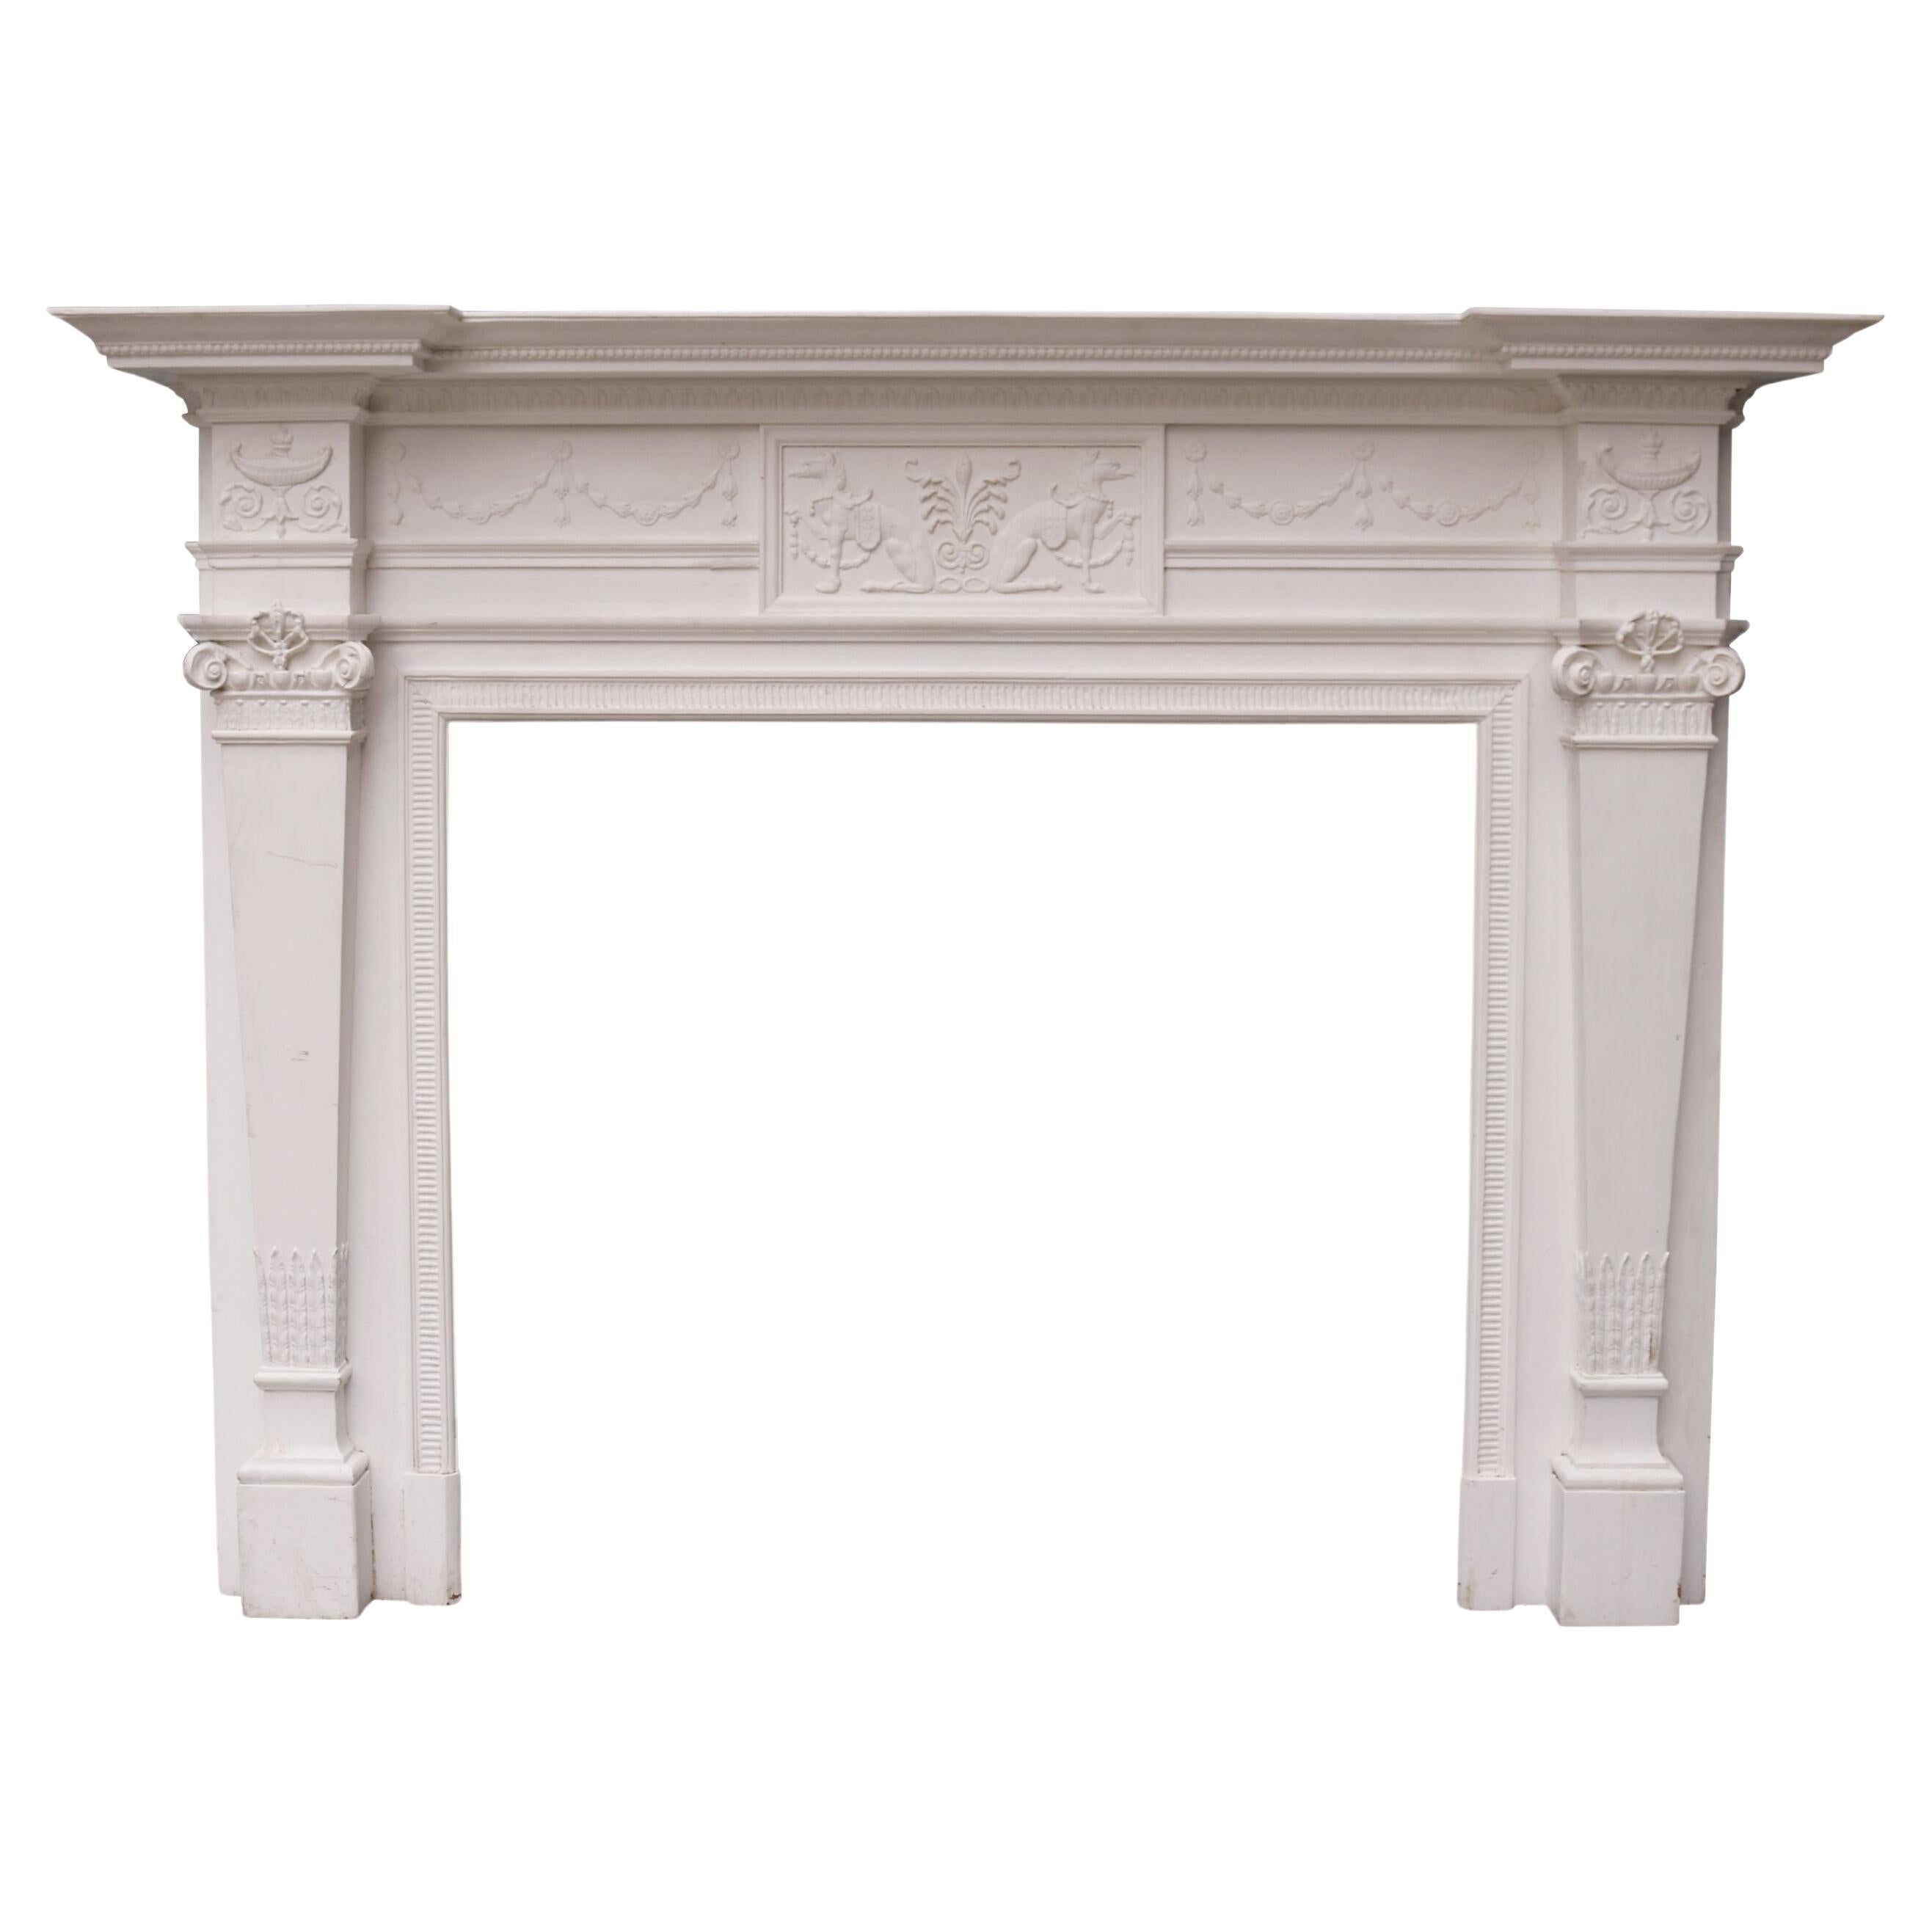 Georgian Neoclassical Style Fireplace For Sale